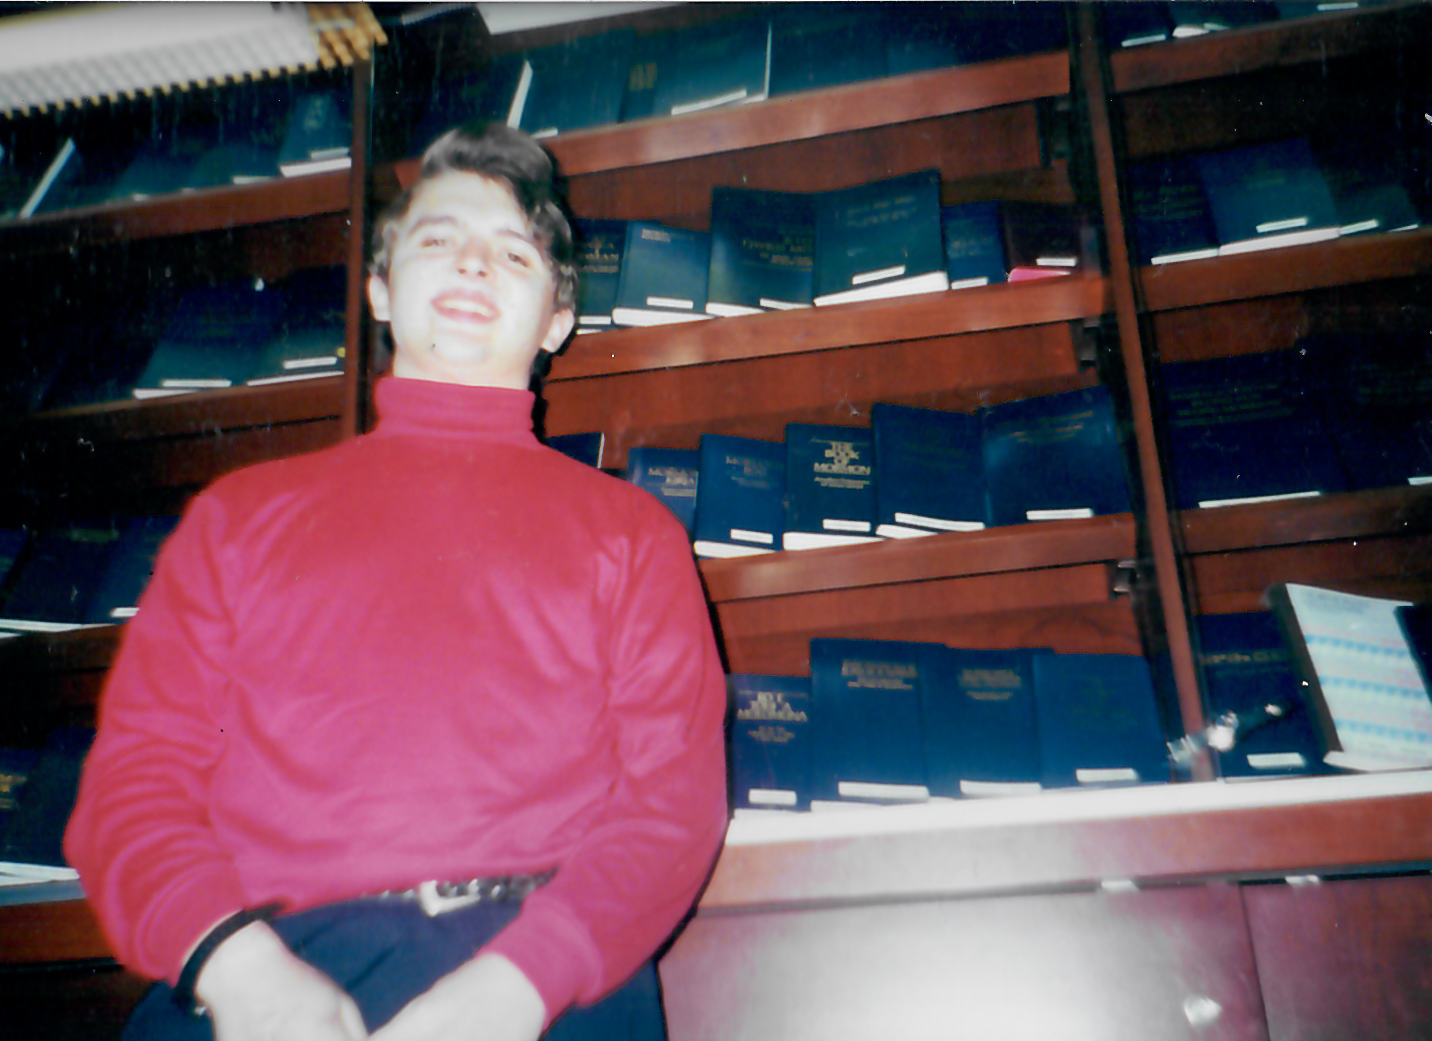 Matthew Sheffield pictured with a shelf filled with Book of Mormon texts